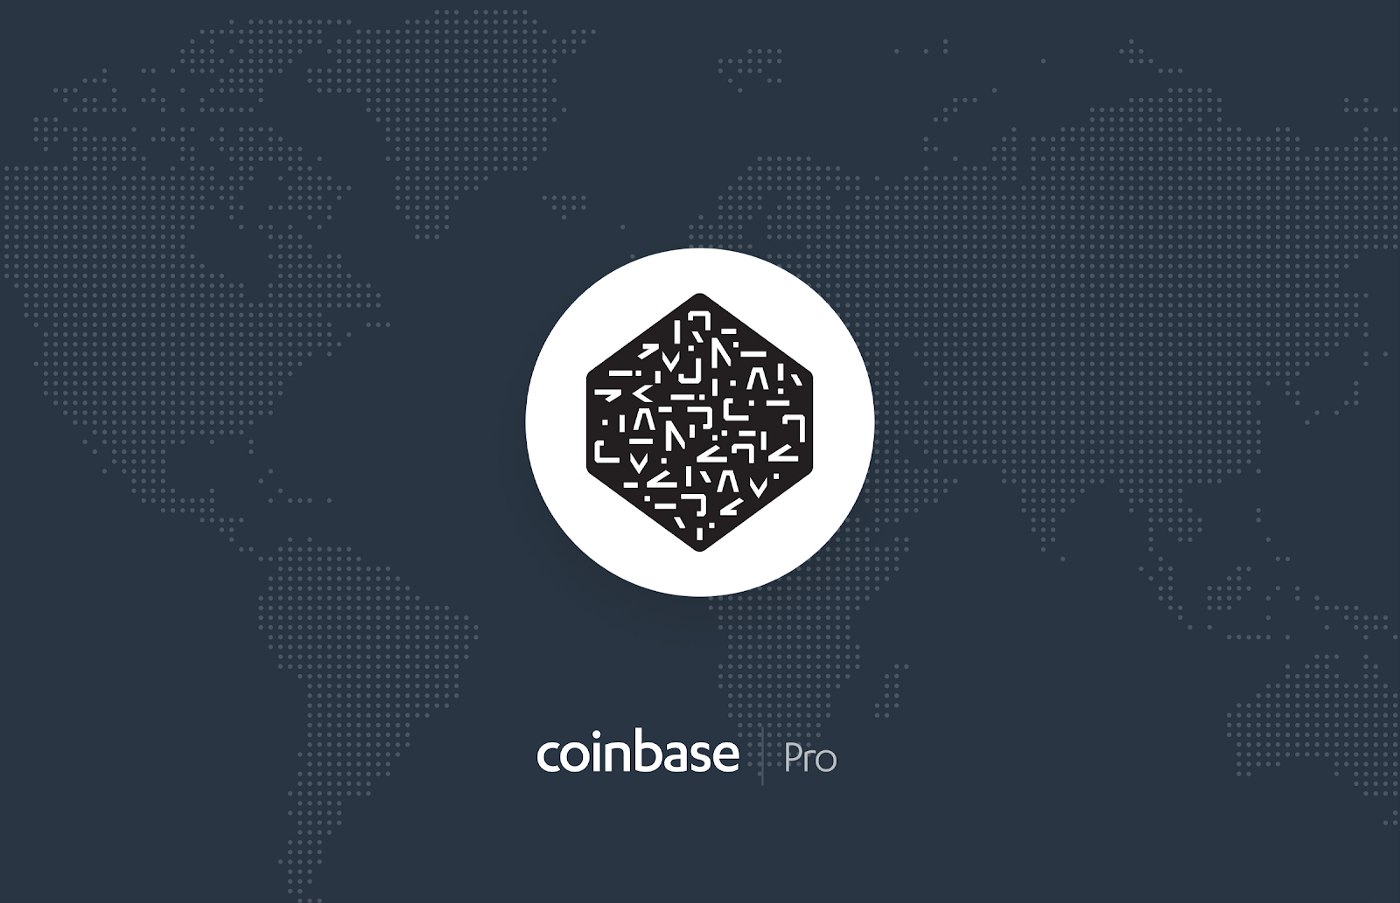 Numeraire (NMR) launched on Coinbase Pro